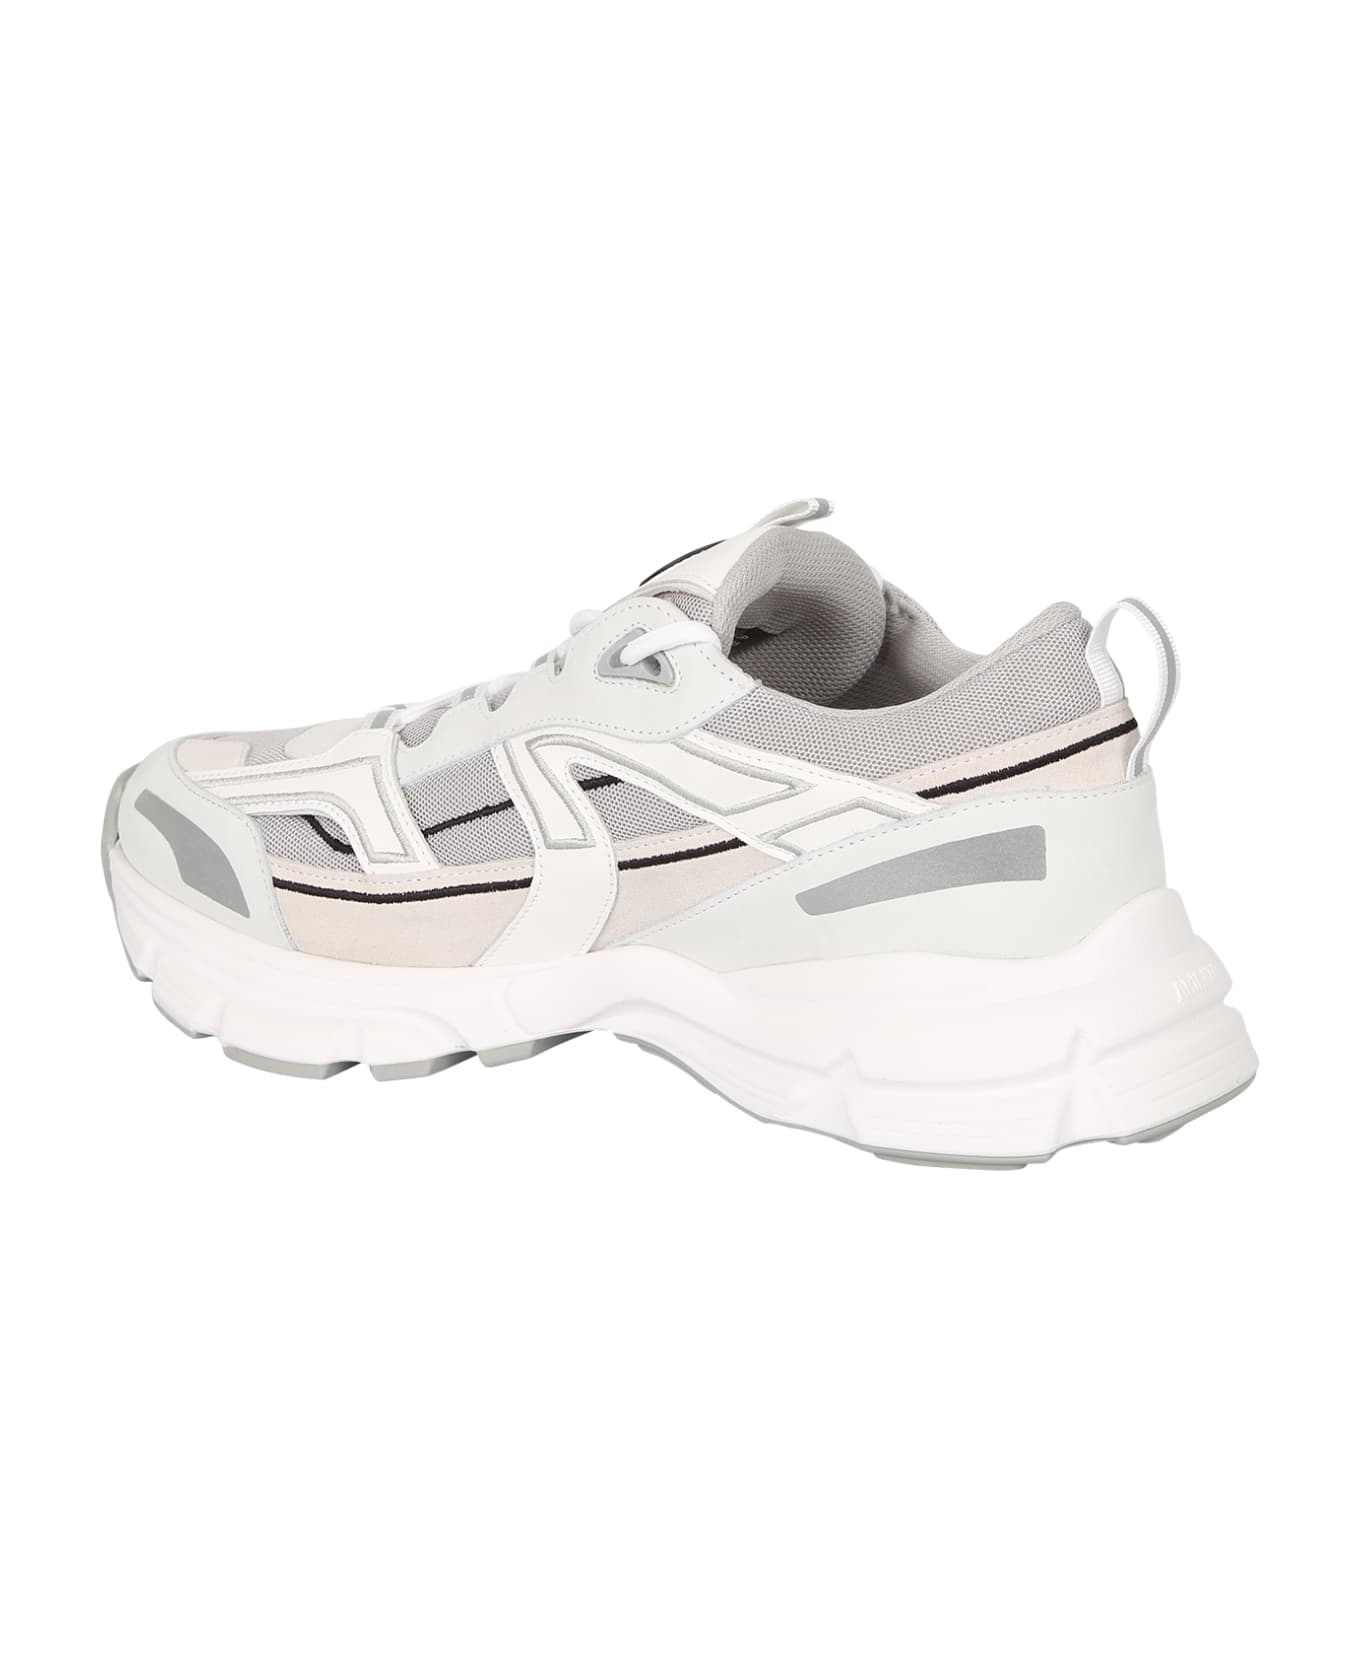 Axel Arigato Lace Up Sneakers - White